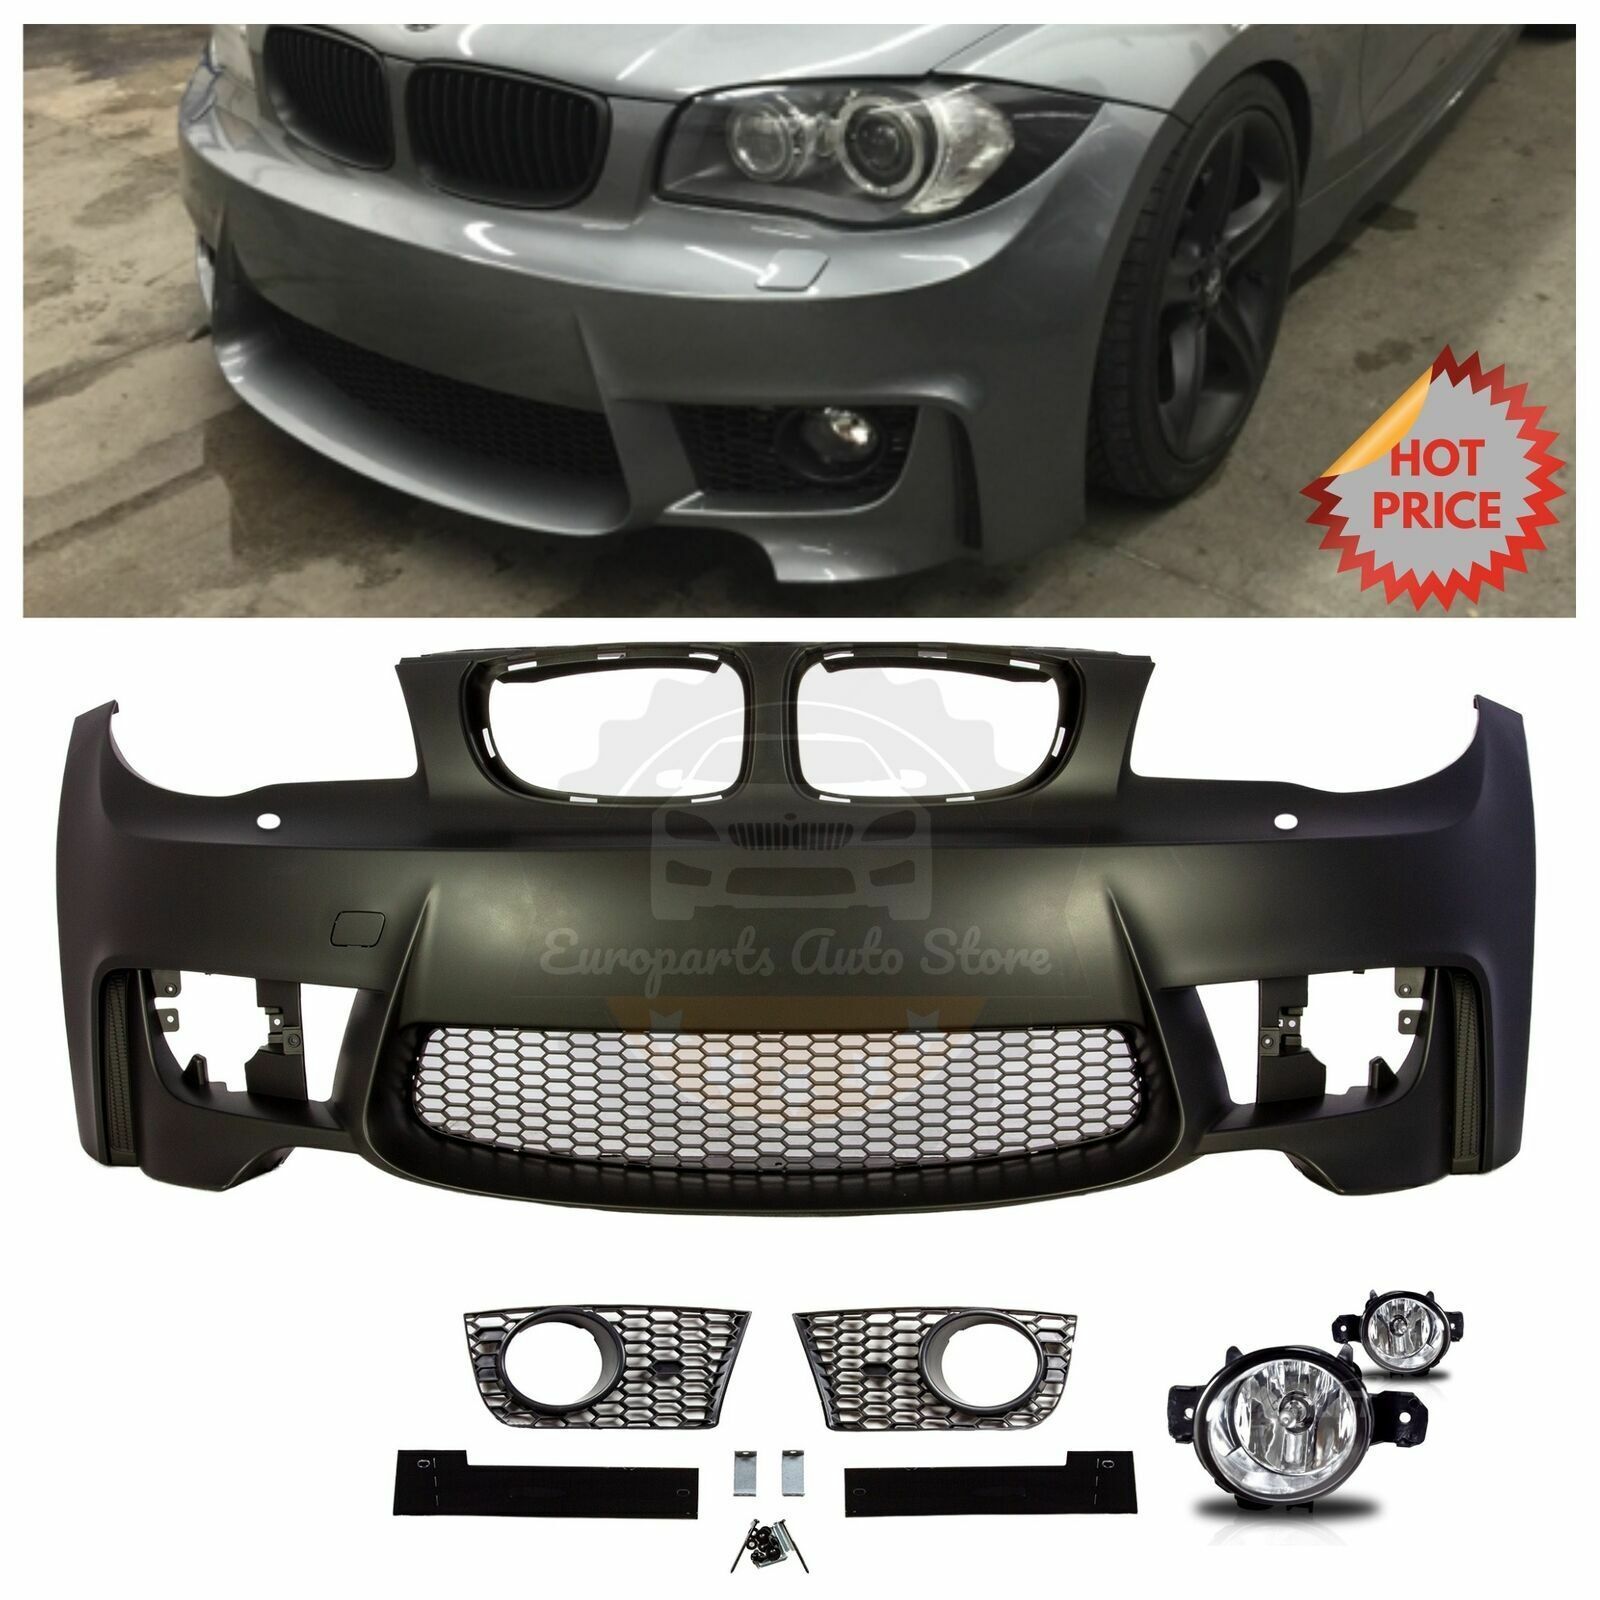 BMW 1M STYLE FRONT BUMPER FOR 2008-13 E82 E88 1 SERIES 128 135 WITH FOG LIGHTS